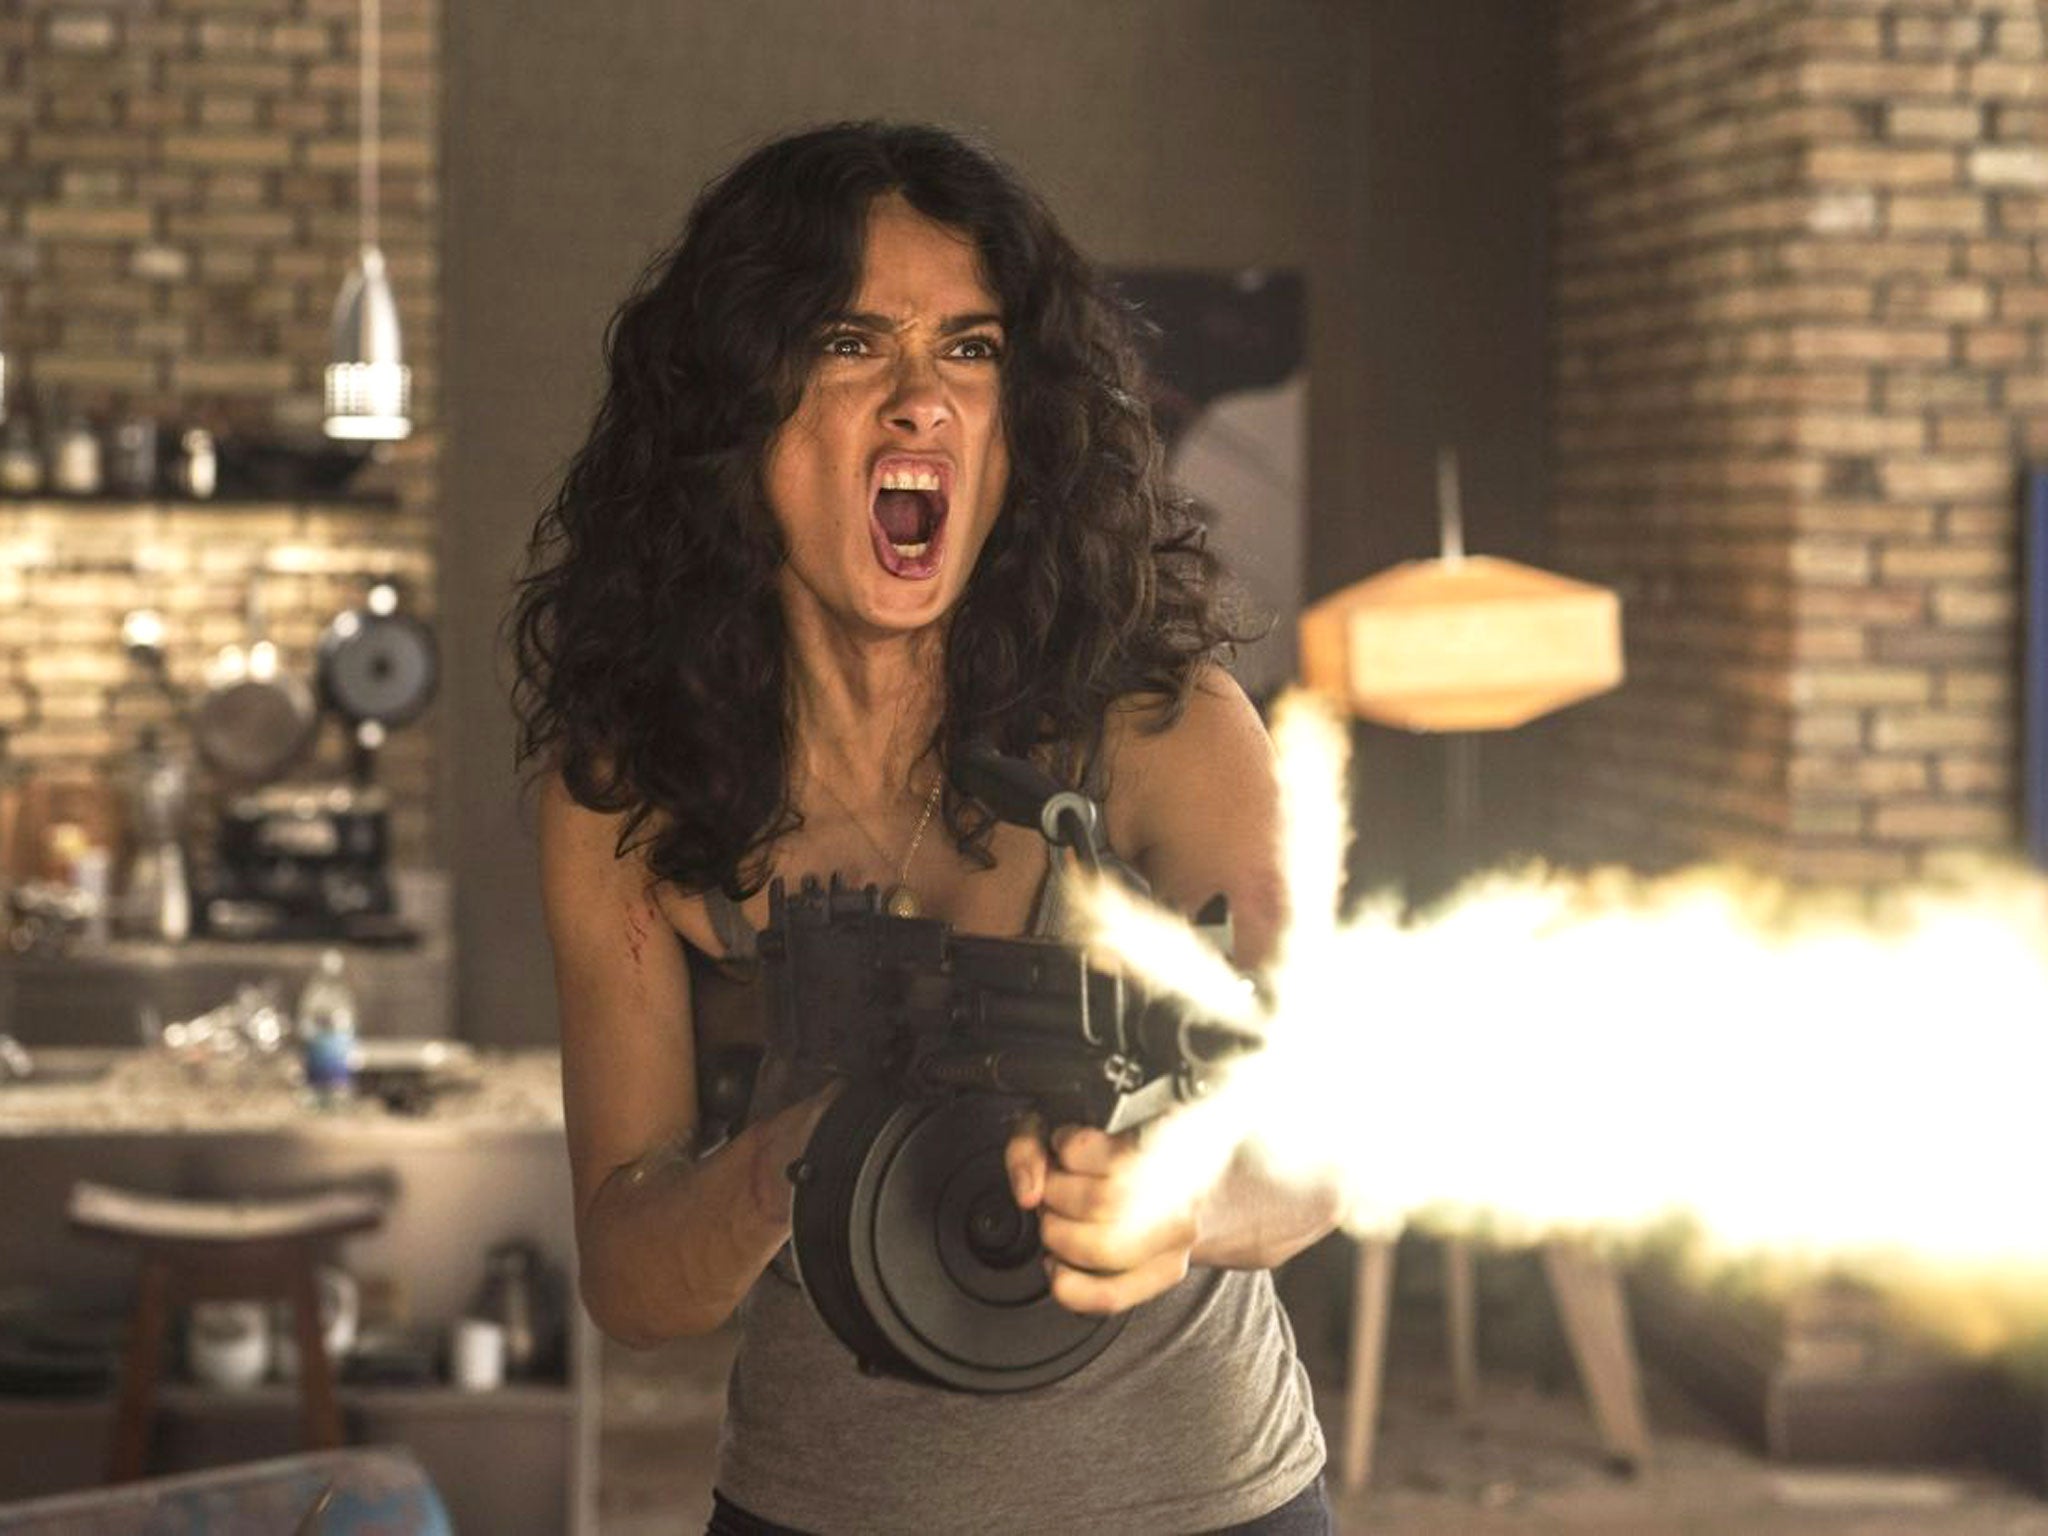 Salma Hayek appears to have picked up an ability to use guns and knives